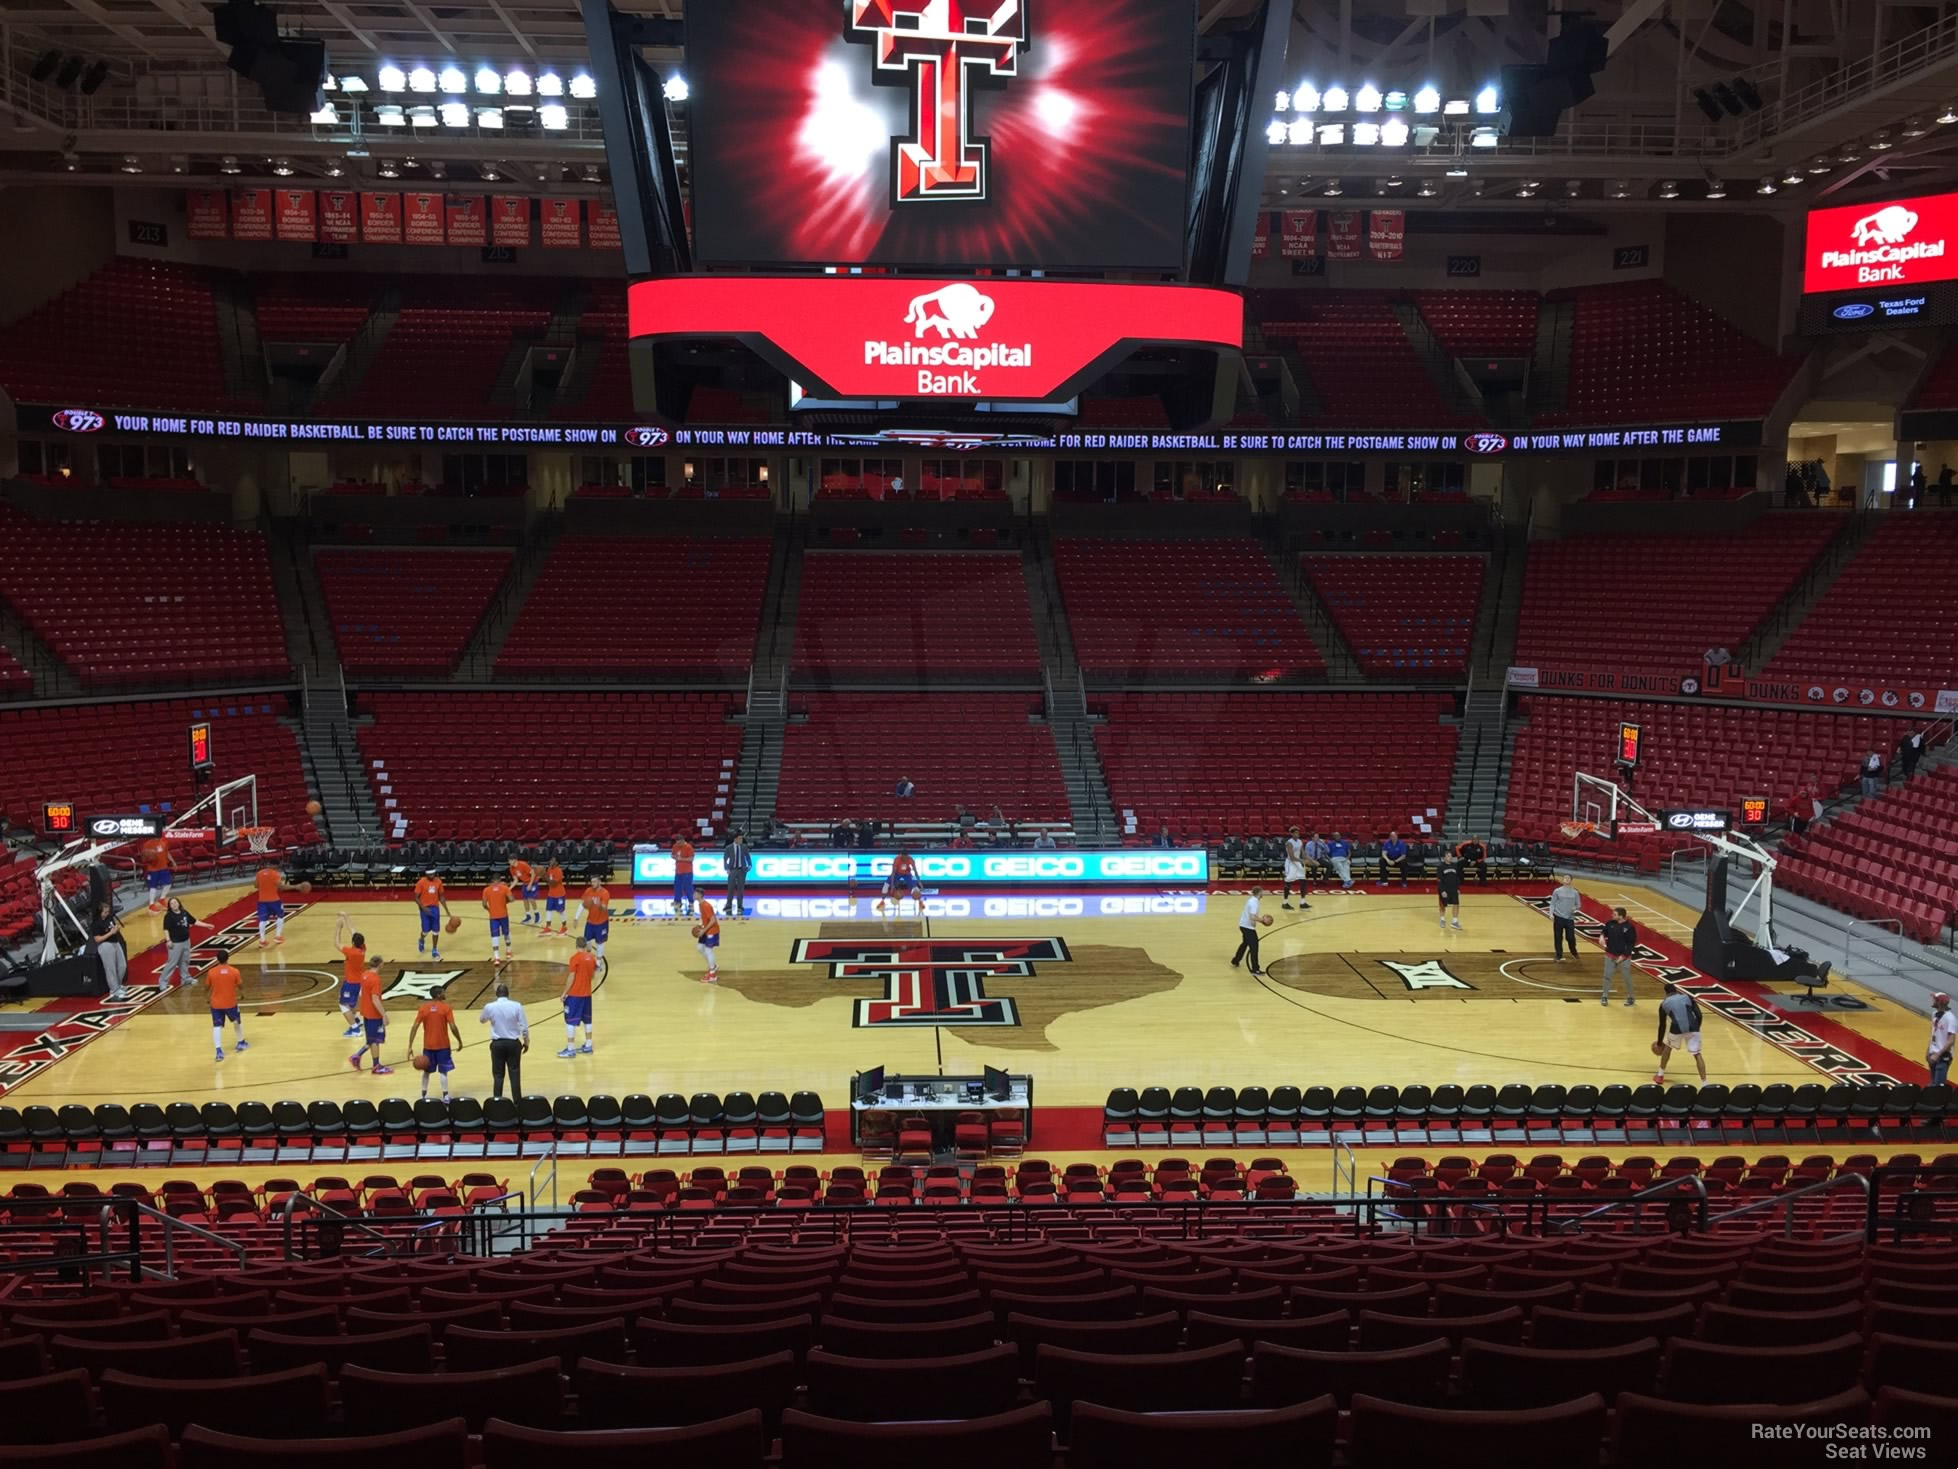 section 101, row 25 seat view  - united supermarkets arena